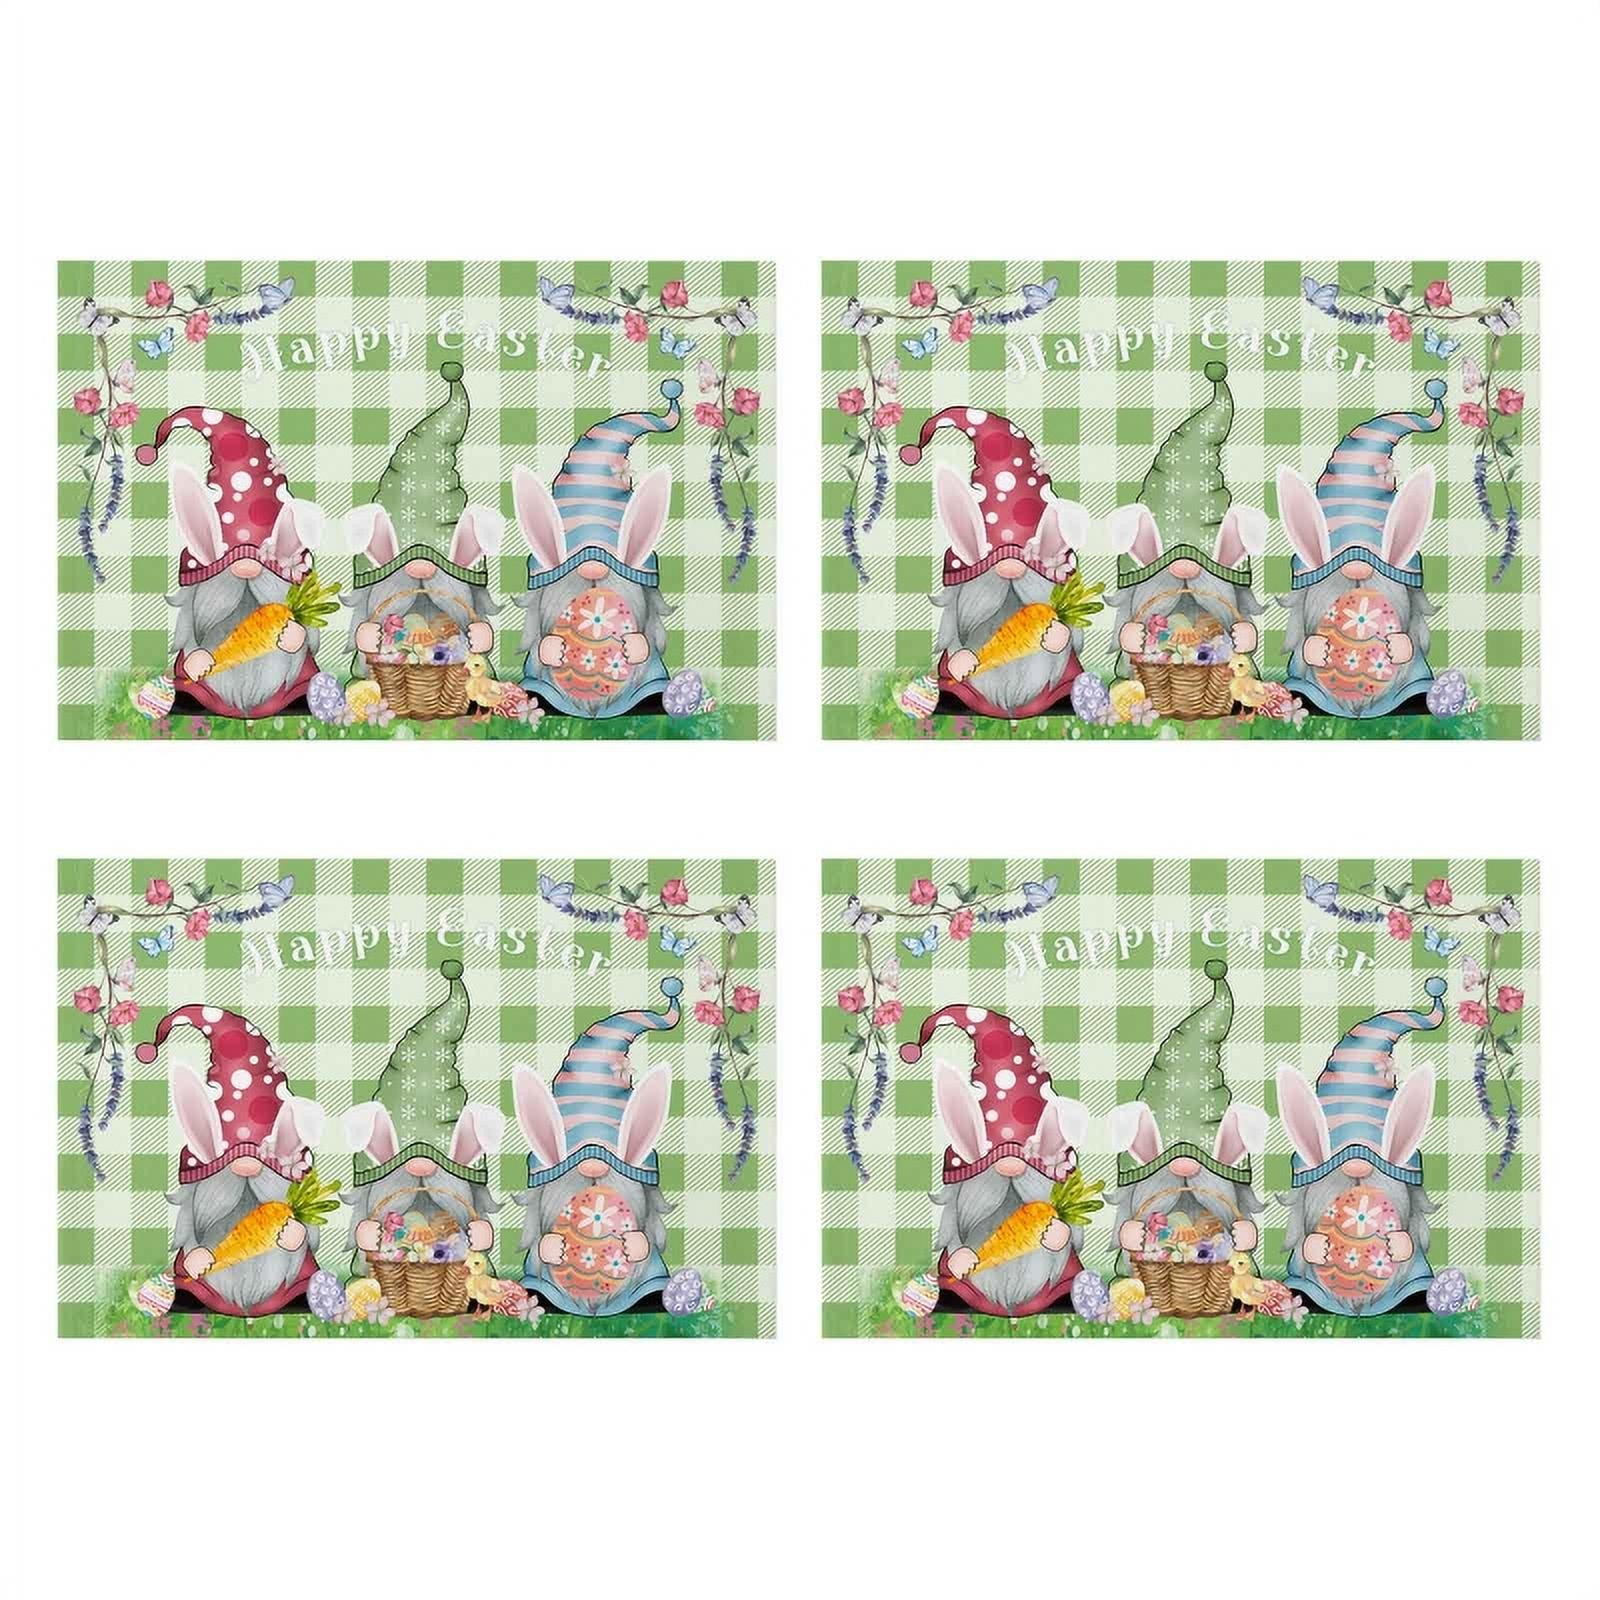 GENEMA 4pcs Easter Placemats Cotton Linen Heat Resistant Table Mats  Non-Slip Happy Easter Bunny Gnome Eggs Placemat for Holiday